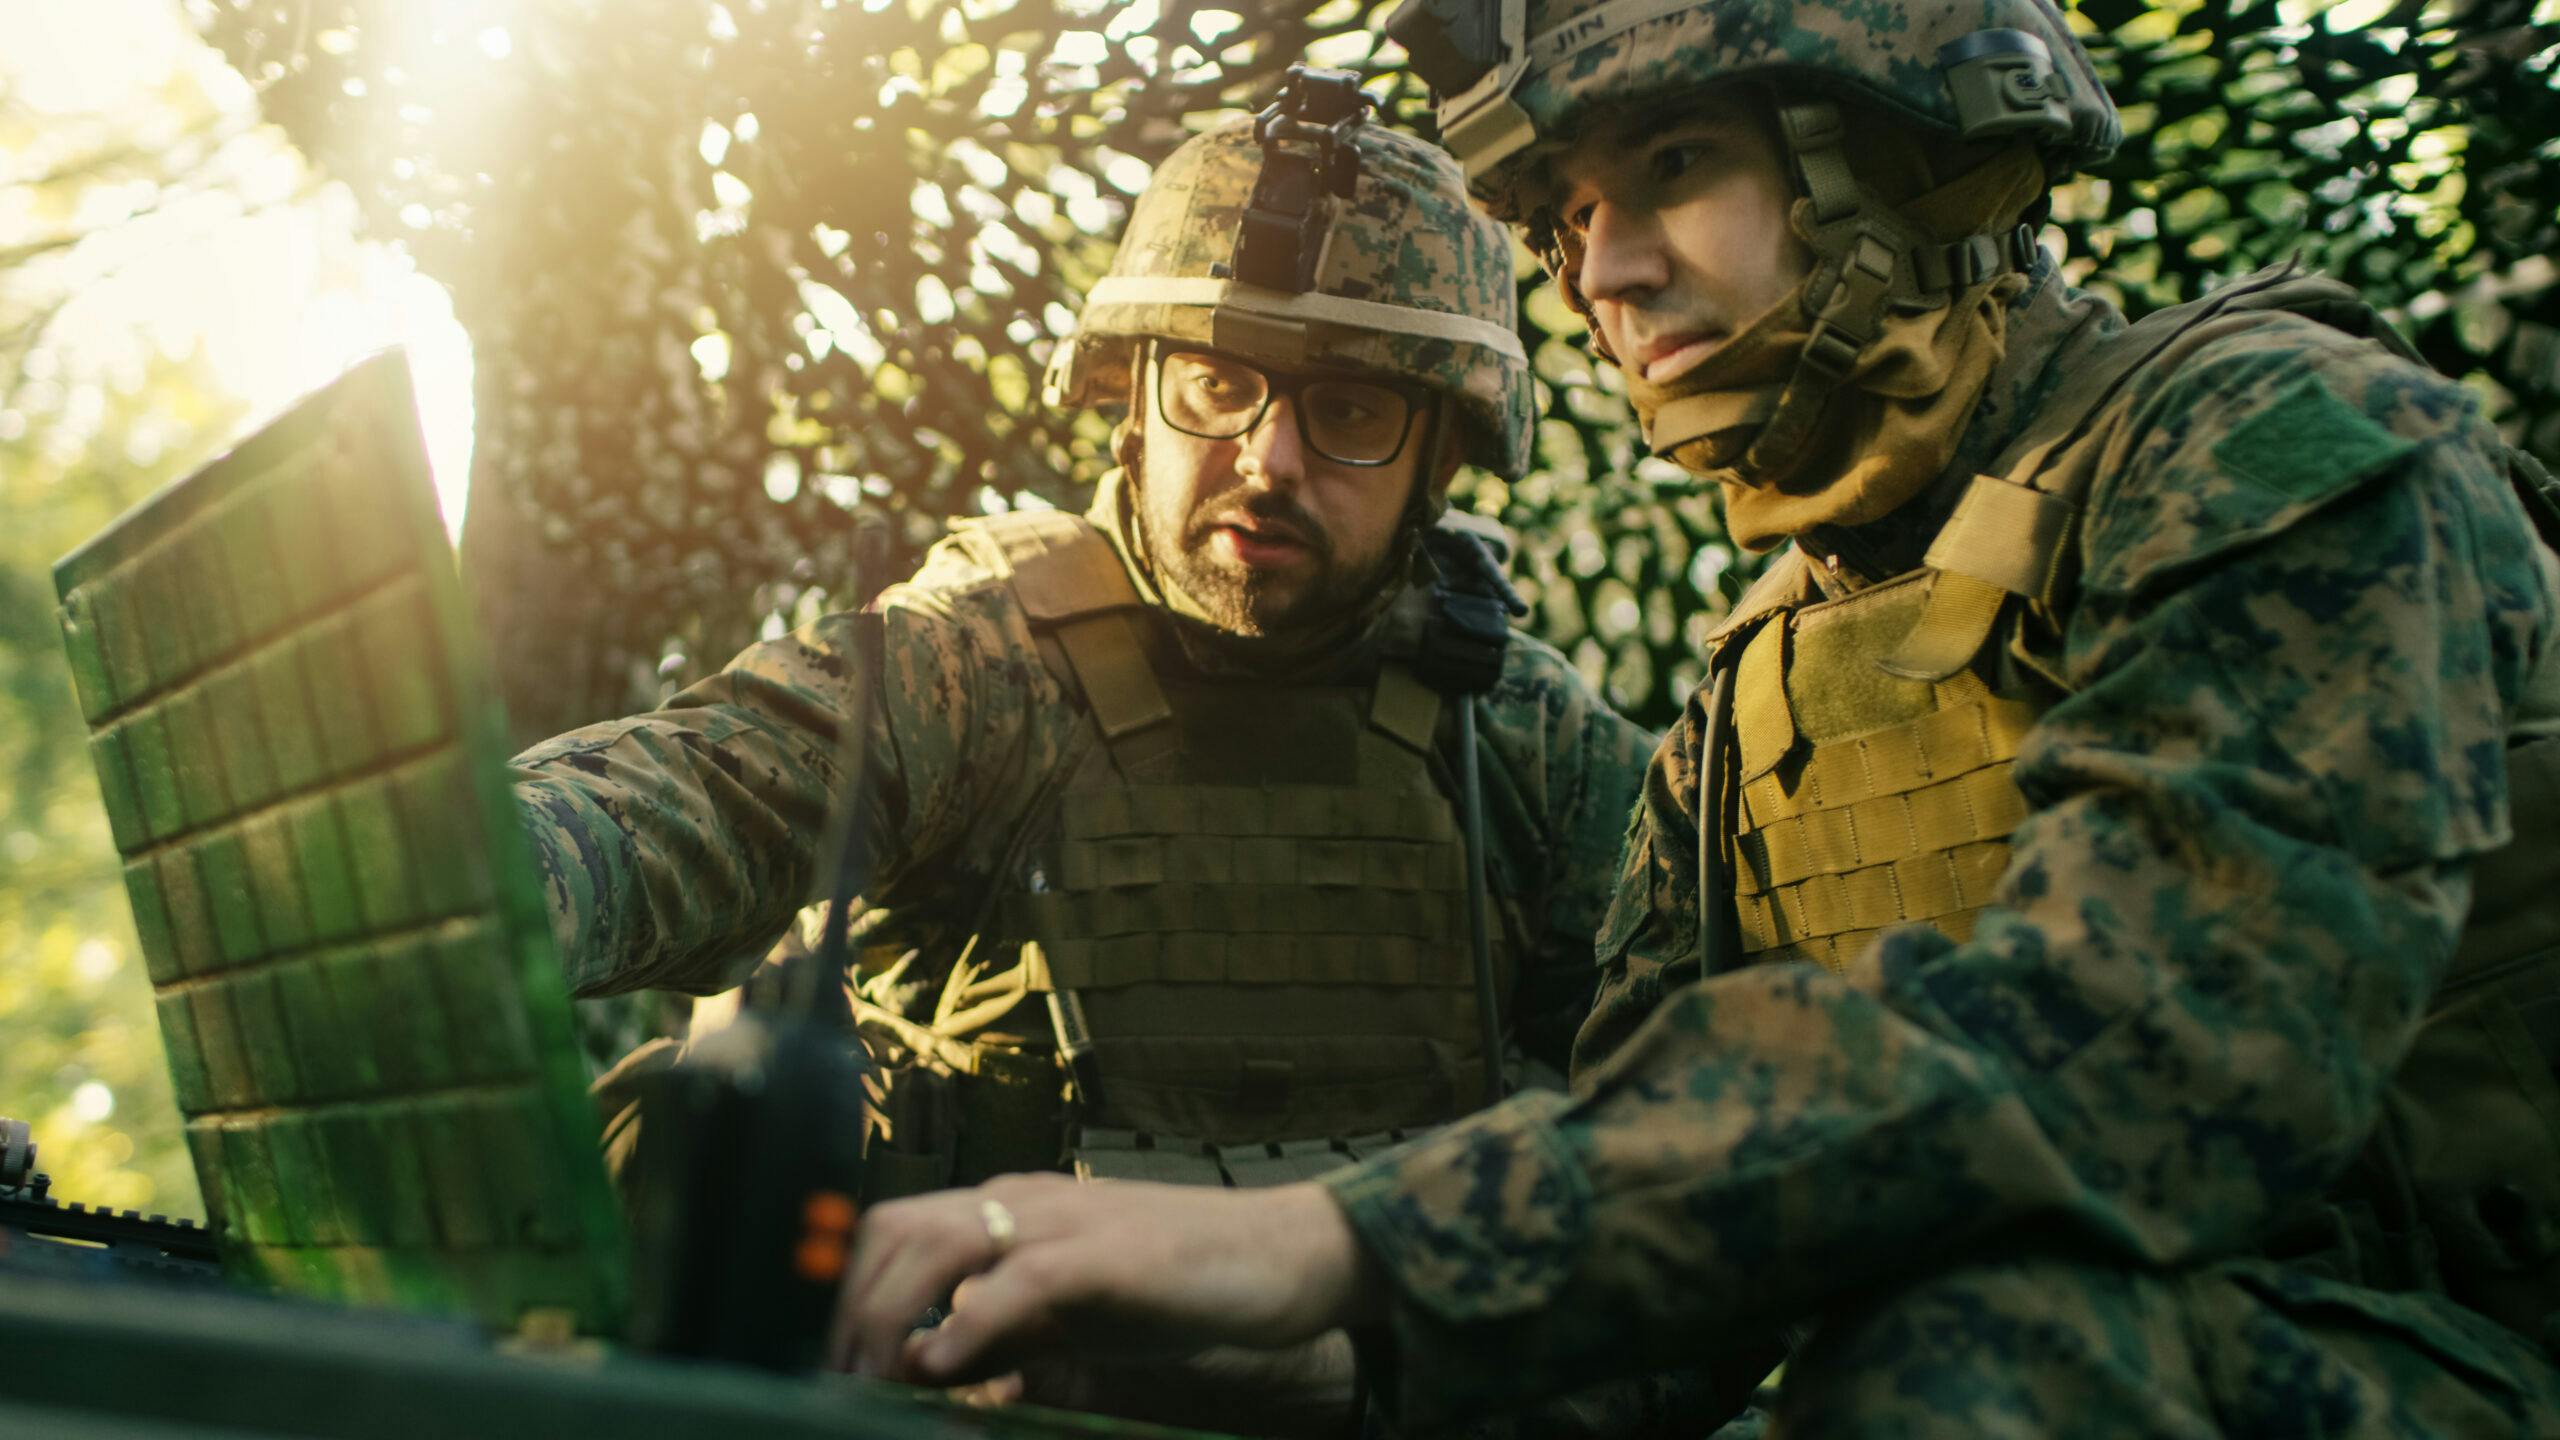 Image of two soldiers in full gear conferring over a field laptop.